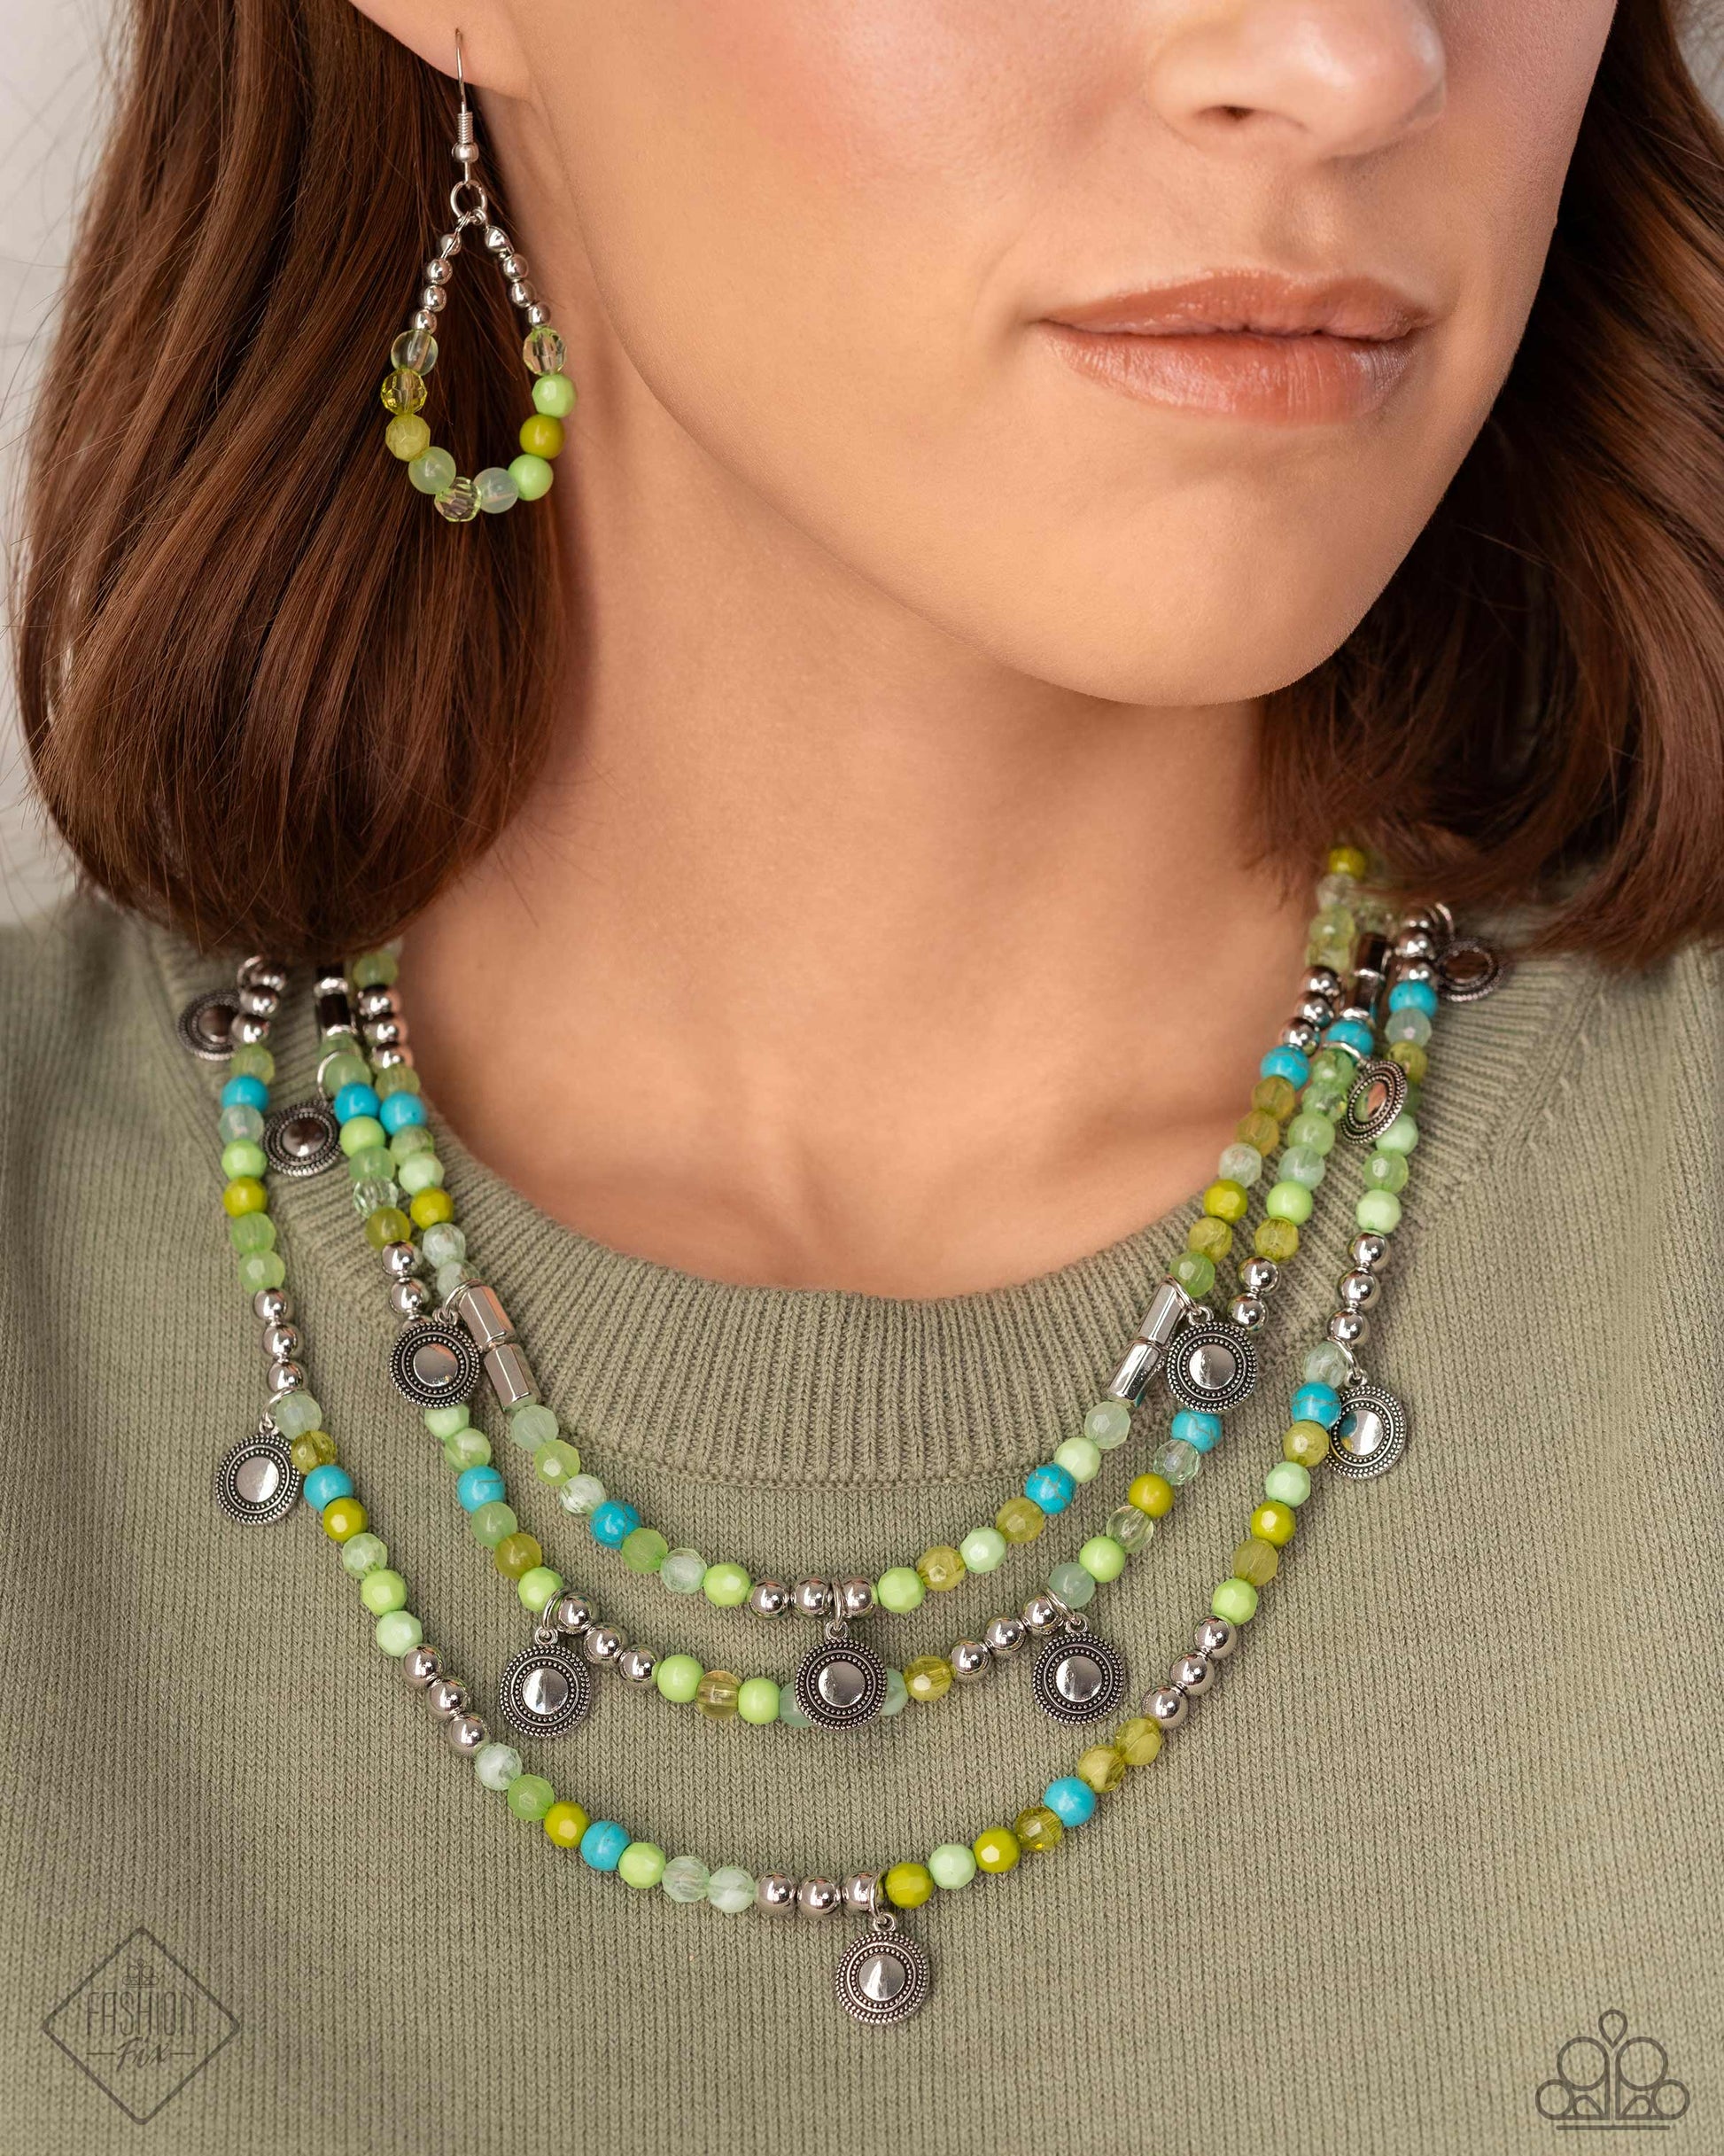 Simply Santa Fe - Blue and Green Jewelry Set - Paparazzi Accessories - Includes one of each accessory featured in the Simply Santa Fe Trend Blend in April's Fashion Fix: Piquant Pattern - Green Necklace, Peppy Pinnacle - Blue Hoop Earrings, ​Poignant Pairing - Green Bracelet, My Interest is Piqued - Silver Bracelet.